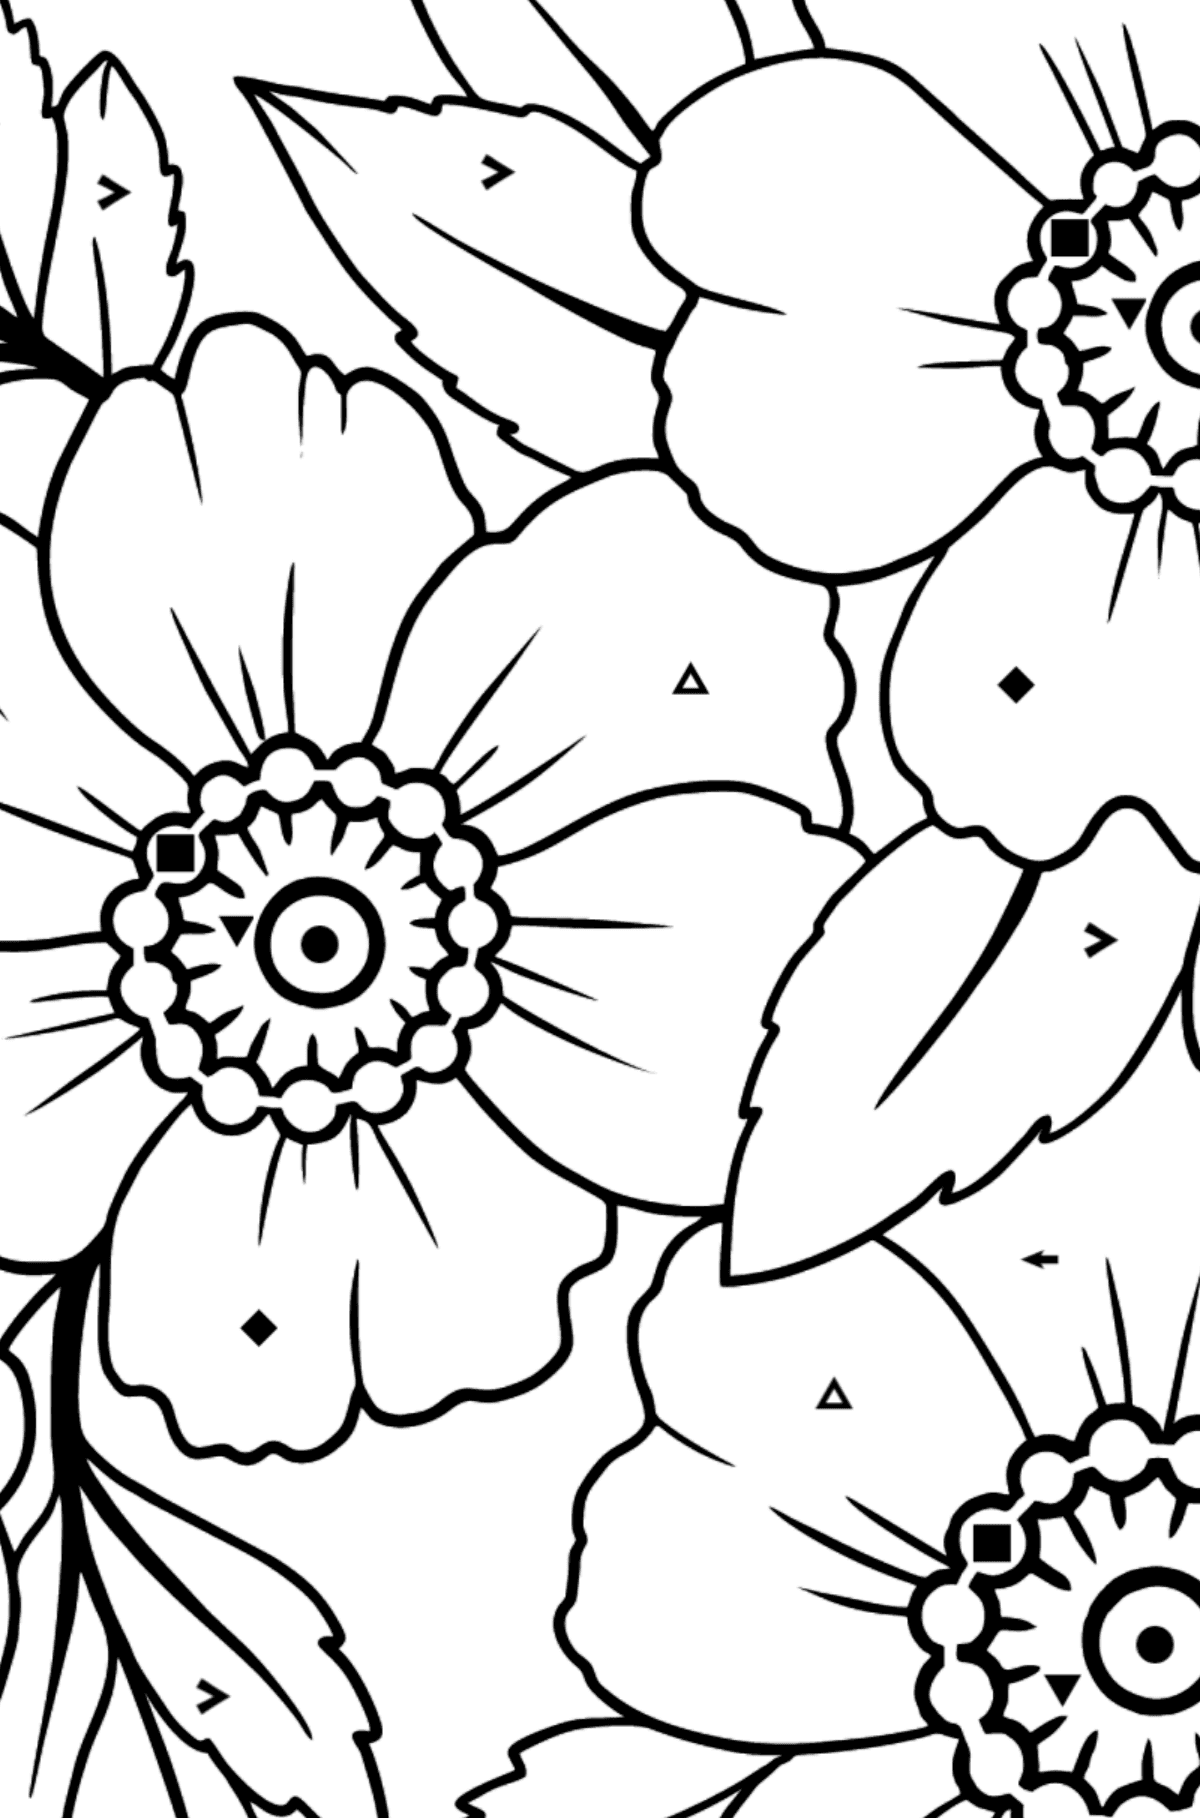 Flower Coloring Page - Japanese Anemone - Coloring by Symbols for Kids